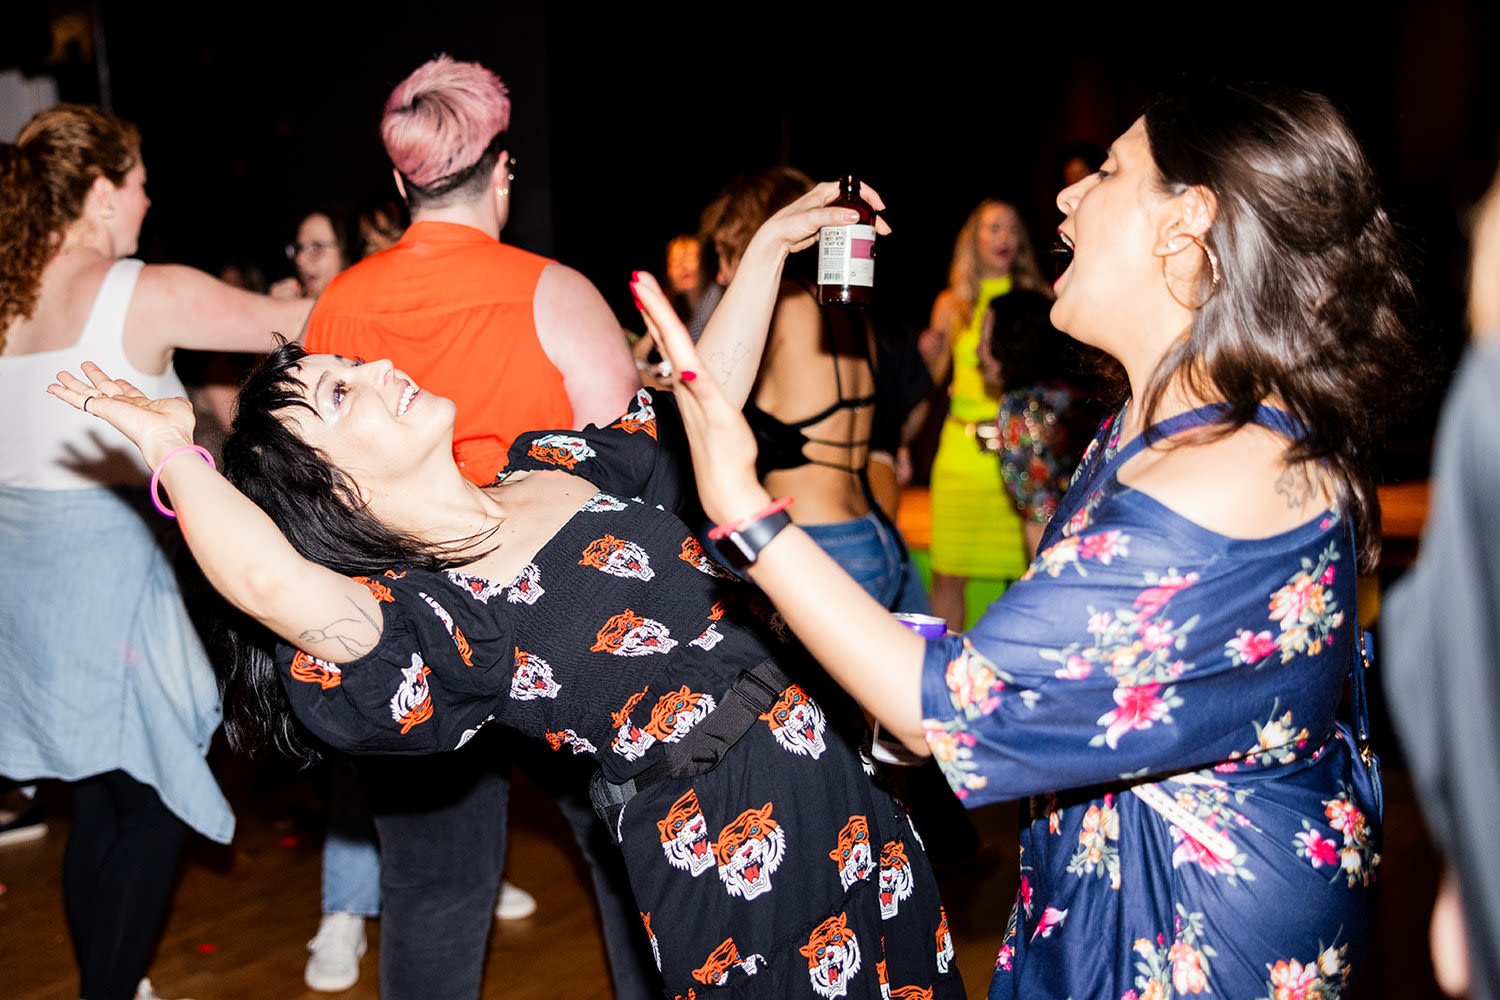 Let's dance: Chicago's best dance parties this summer, from cumbia to swing